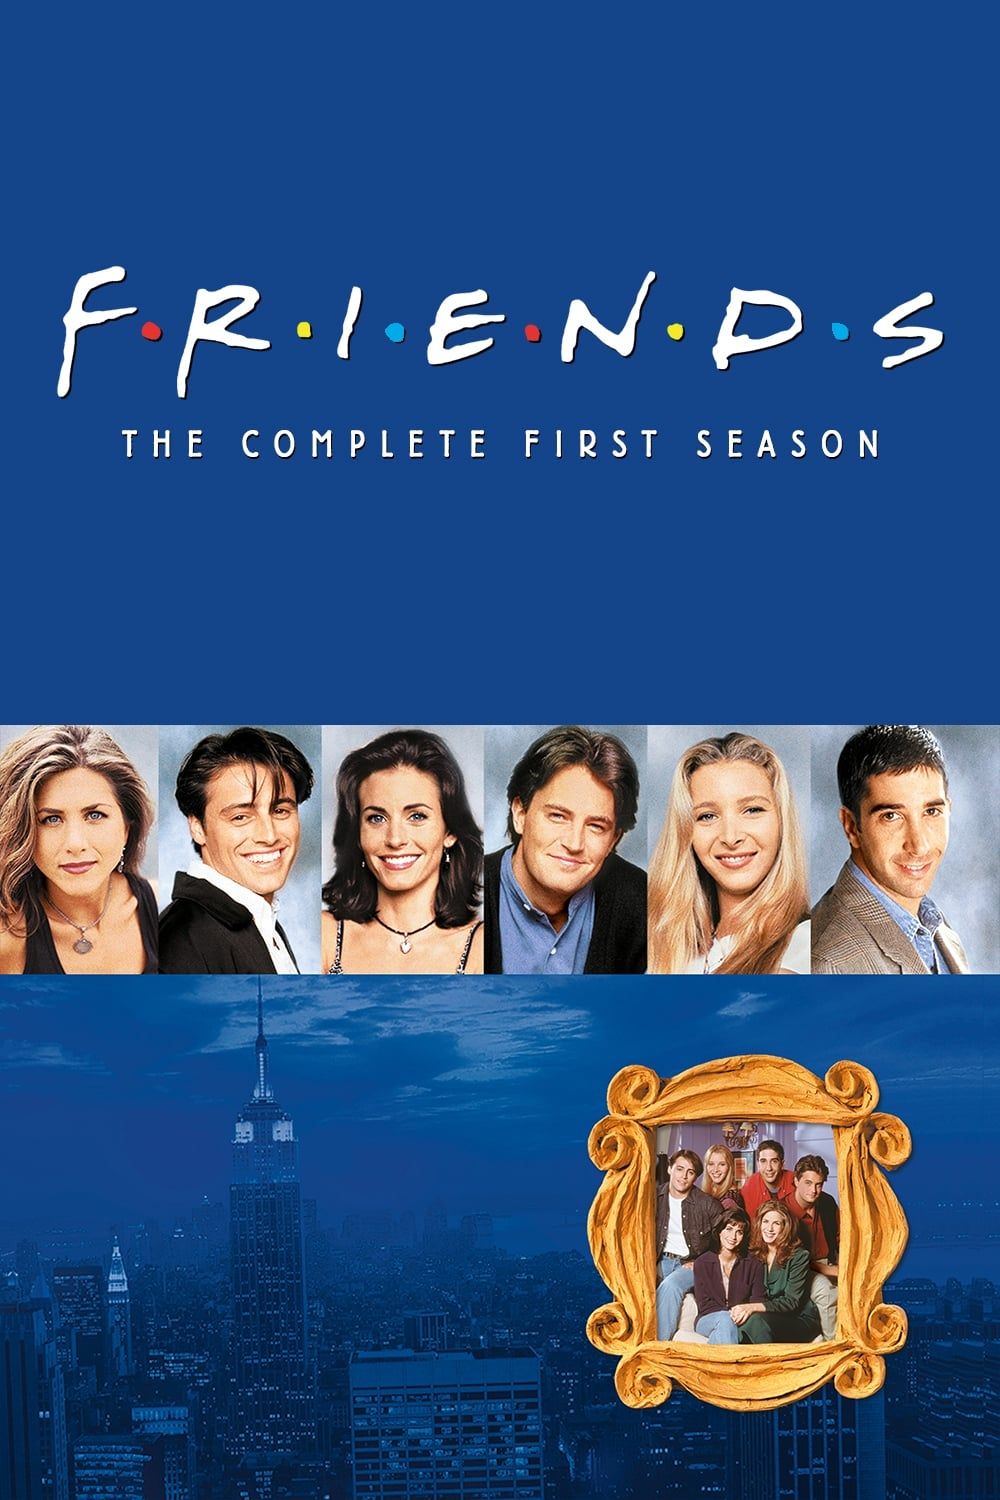 How To Watch Friends Series For Free? — All 10 Seasons Online